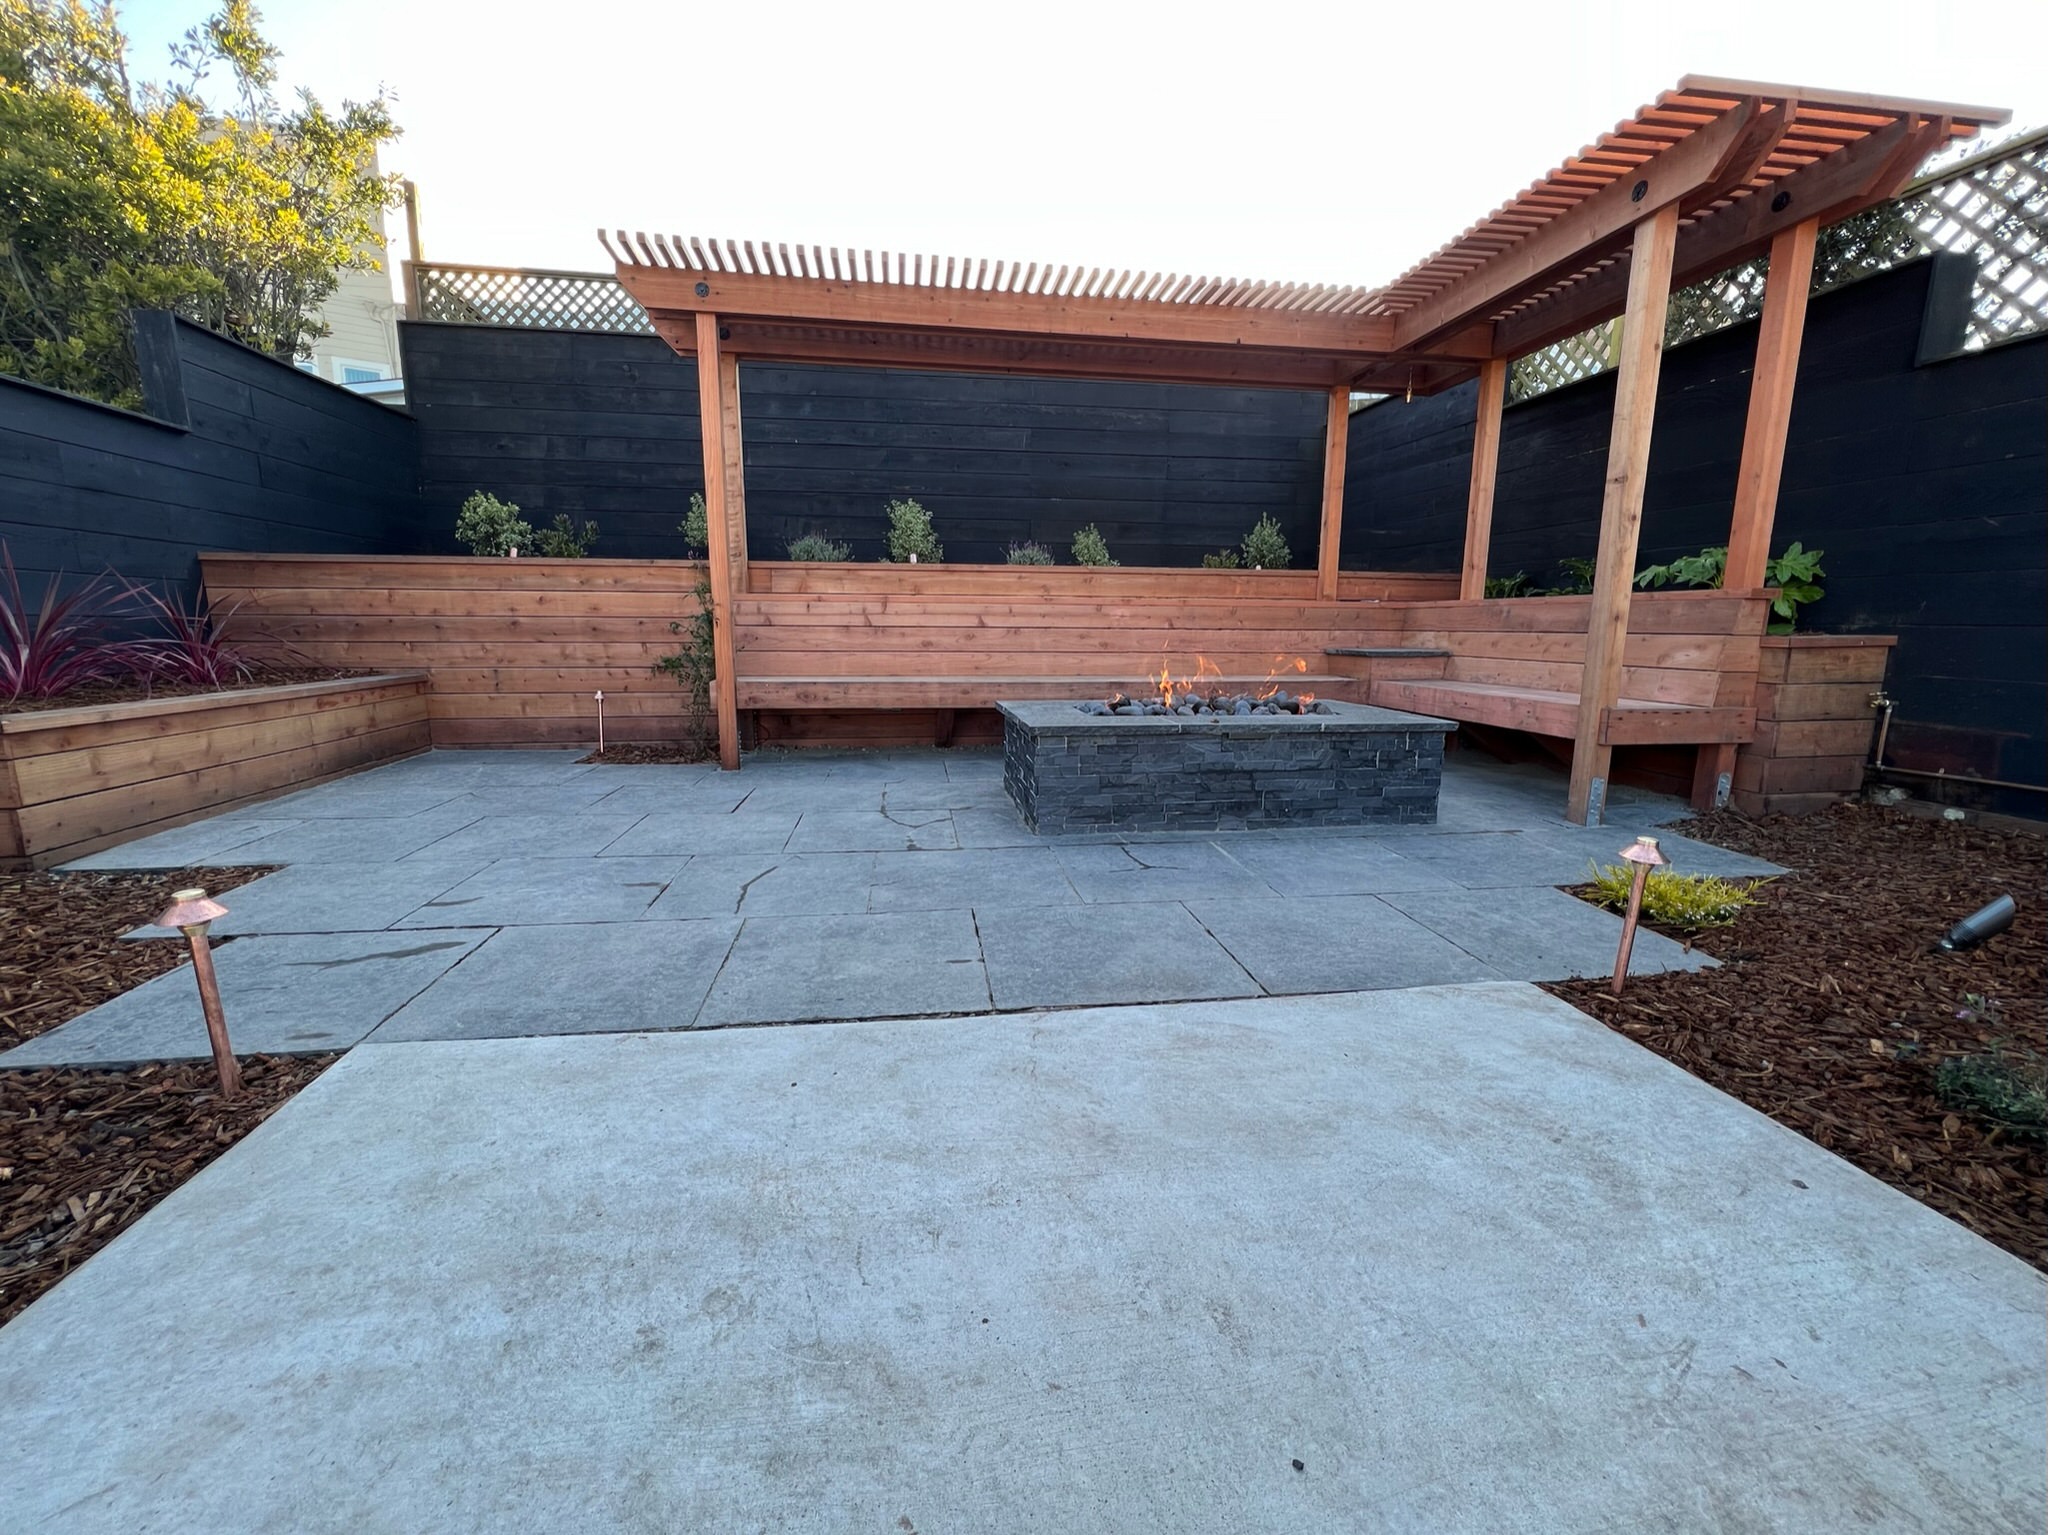 Completed redwood bench, pergola, and fire pit at our Outer Sunset, San Francisco project. Black basalt patio.